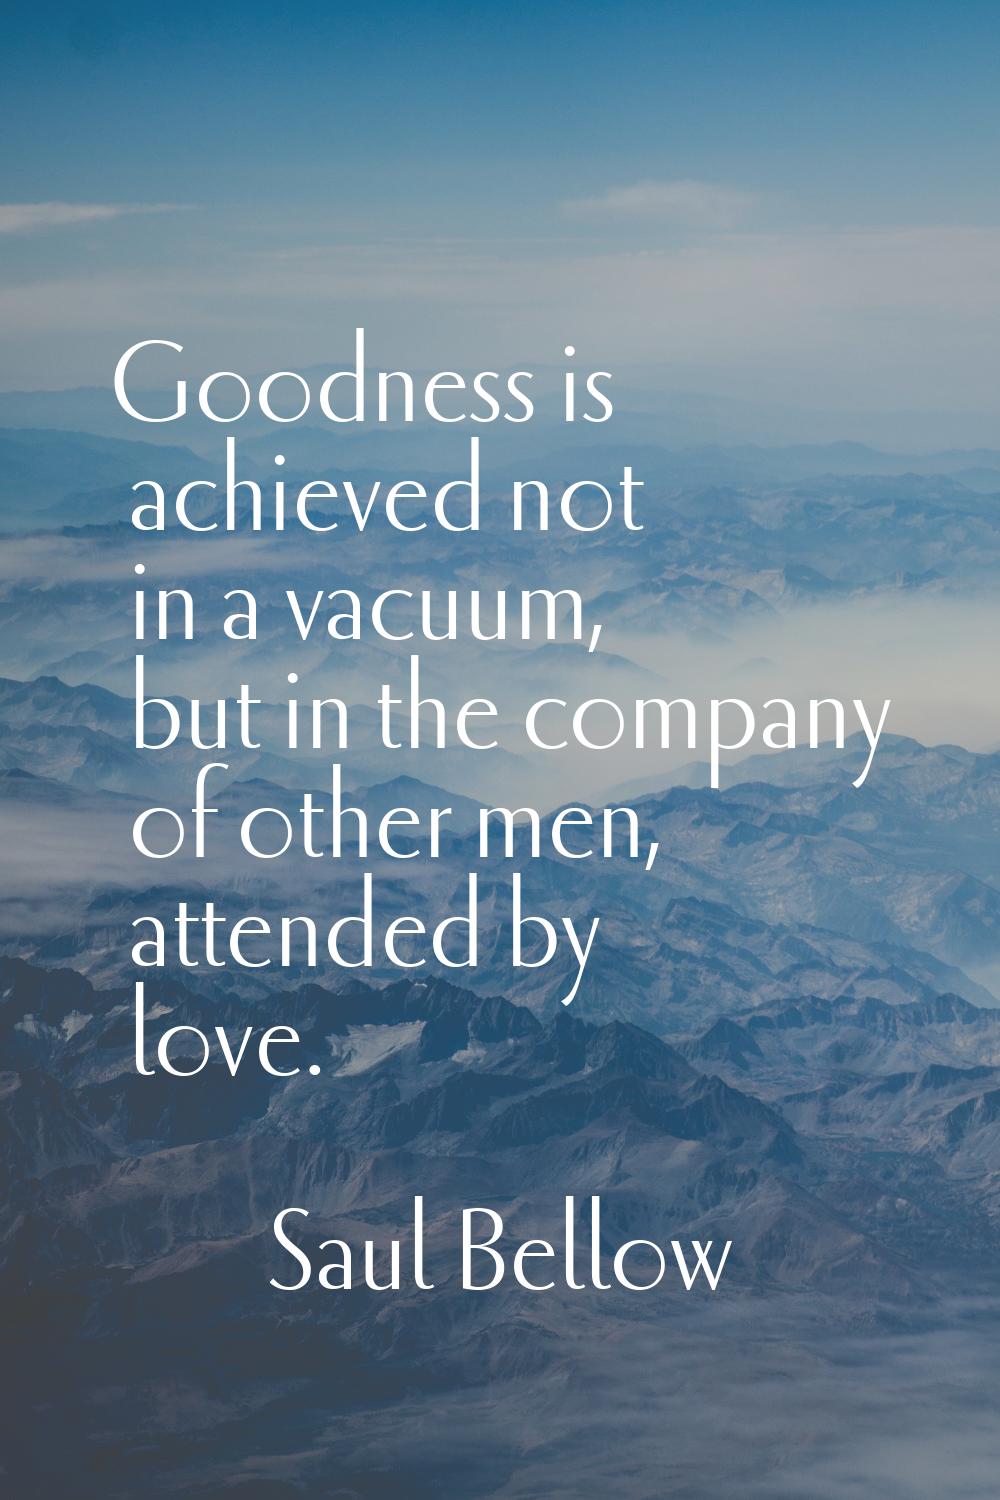 Goodness is achieved not in a vacuum, but in the company of other men, attended by love.